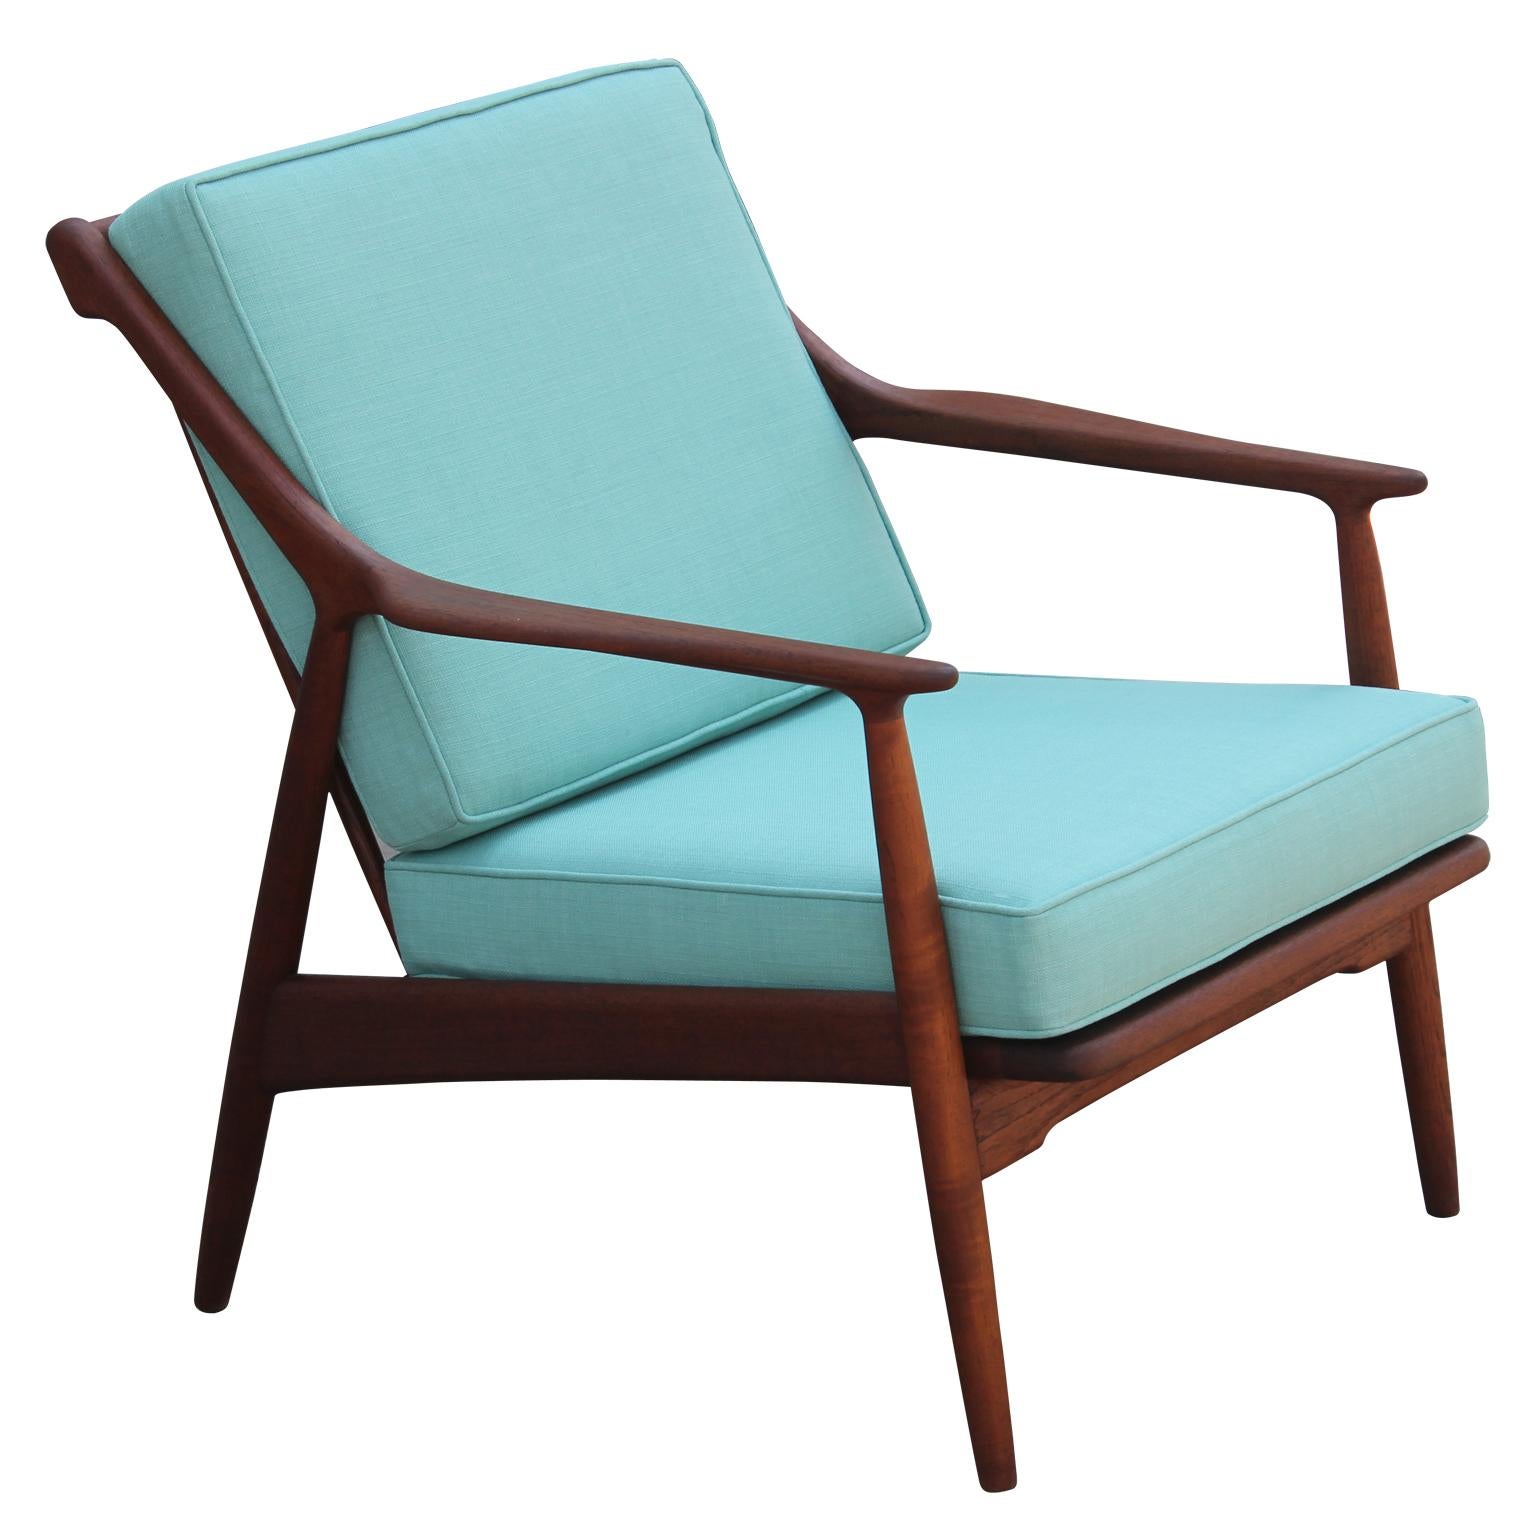 Rare modern Danish style teak spindle back lounge chair by Jason Ringsted, 